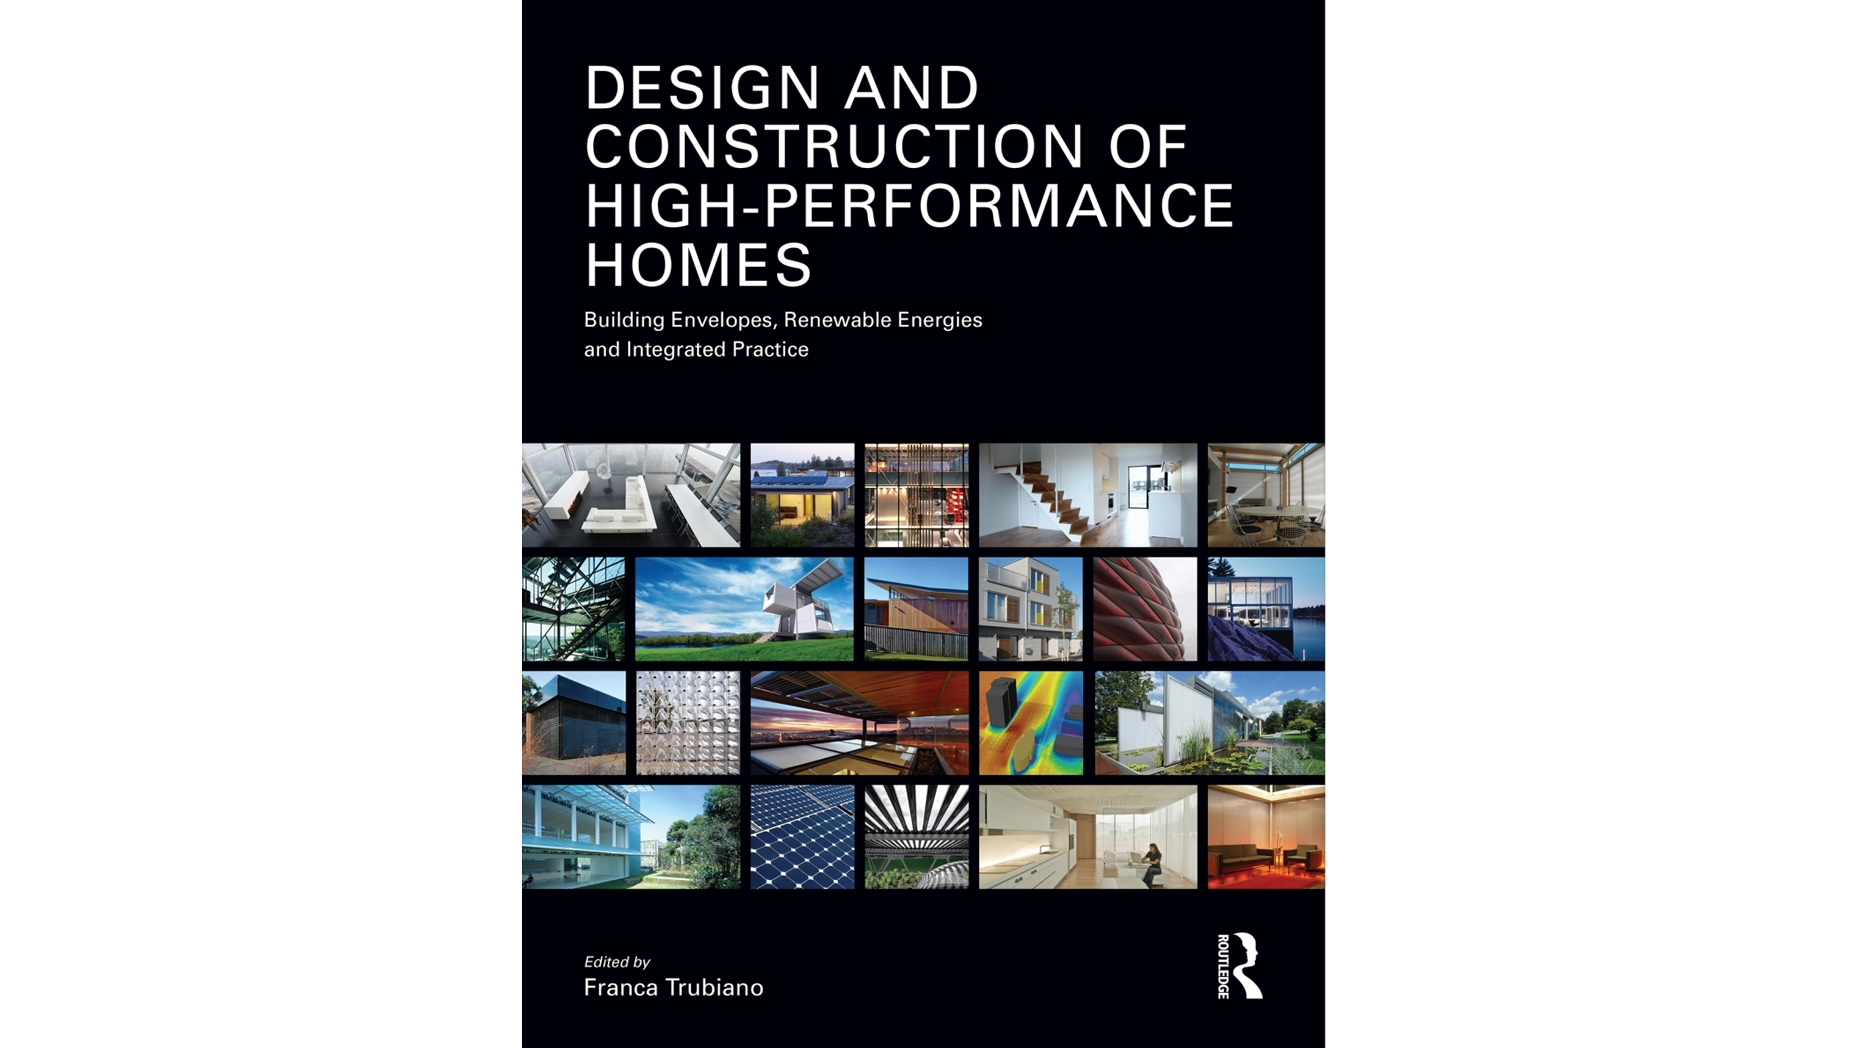 Design and Construction of High Performance Homes: Building Envelopes, Renewable Energies and Integrated Practice book cover